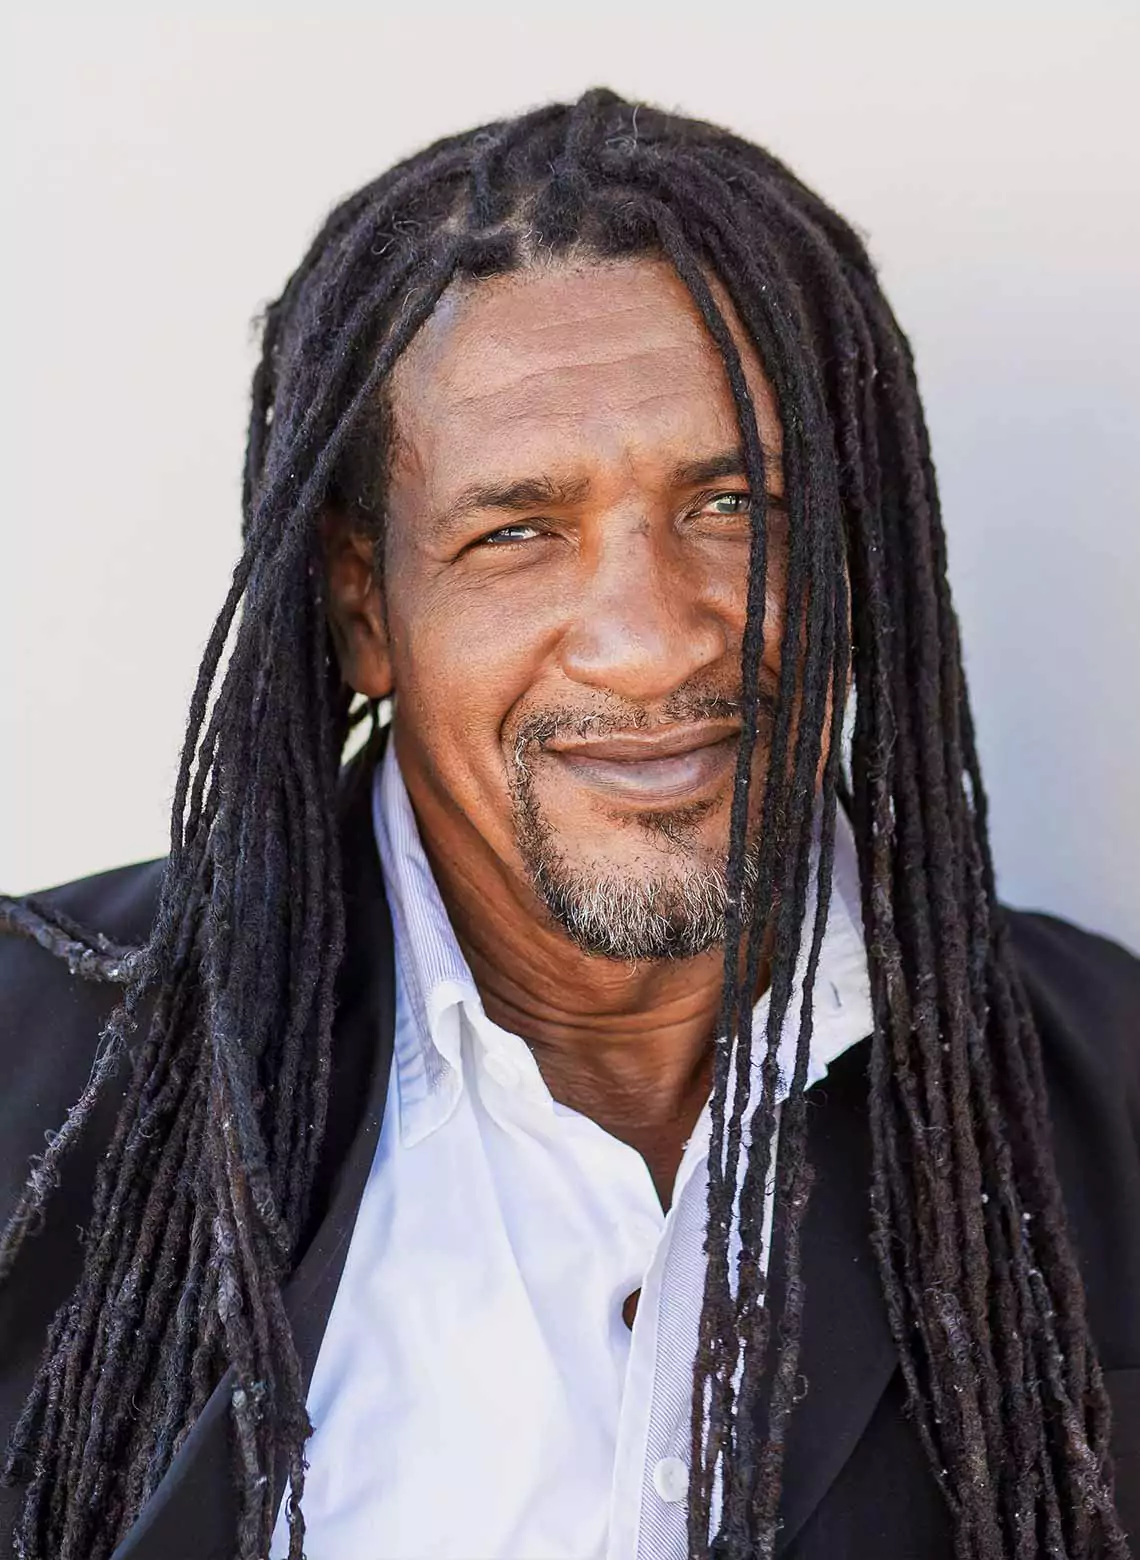 Image of man with thin locs.  